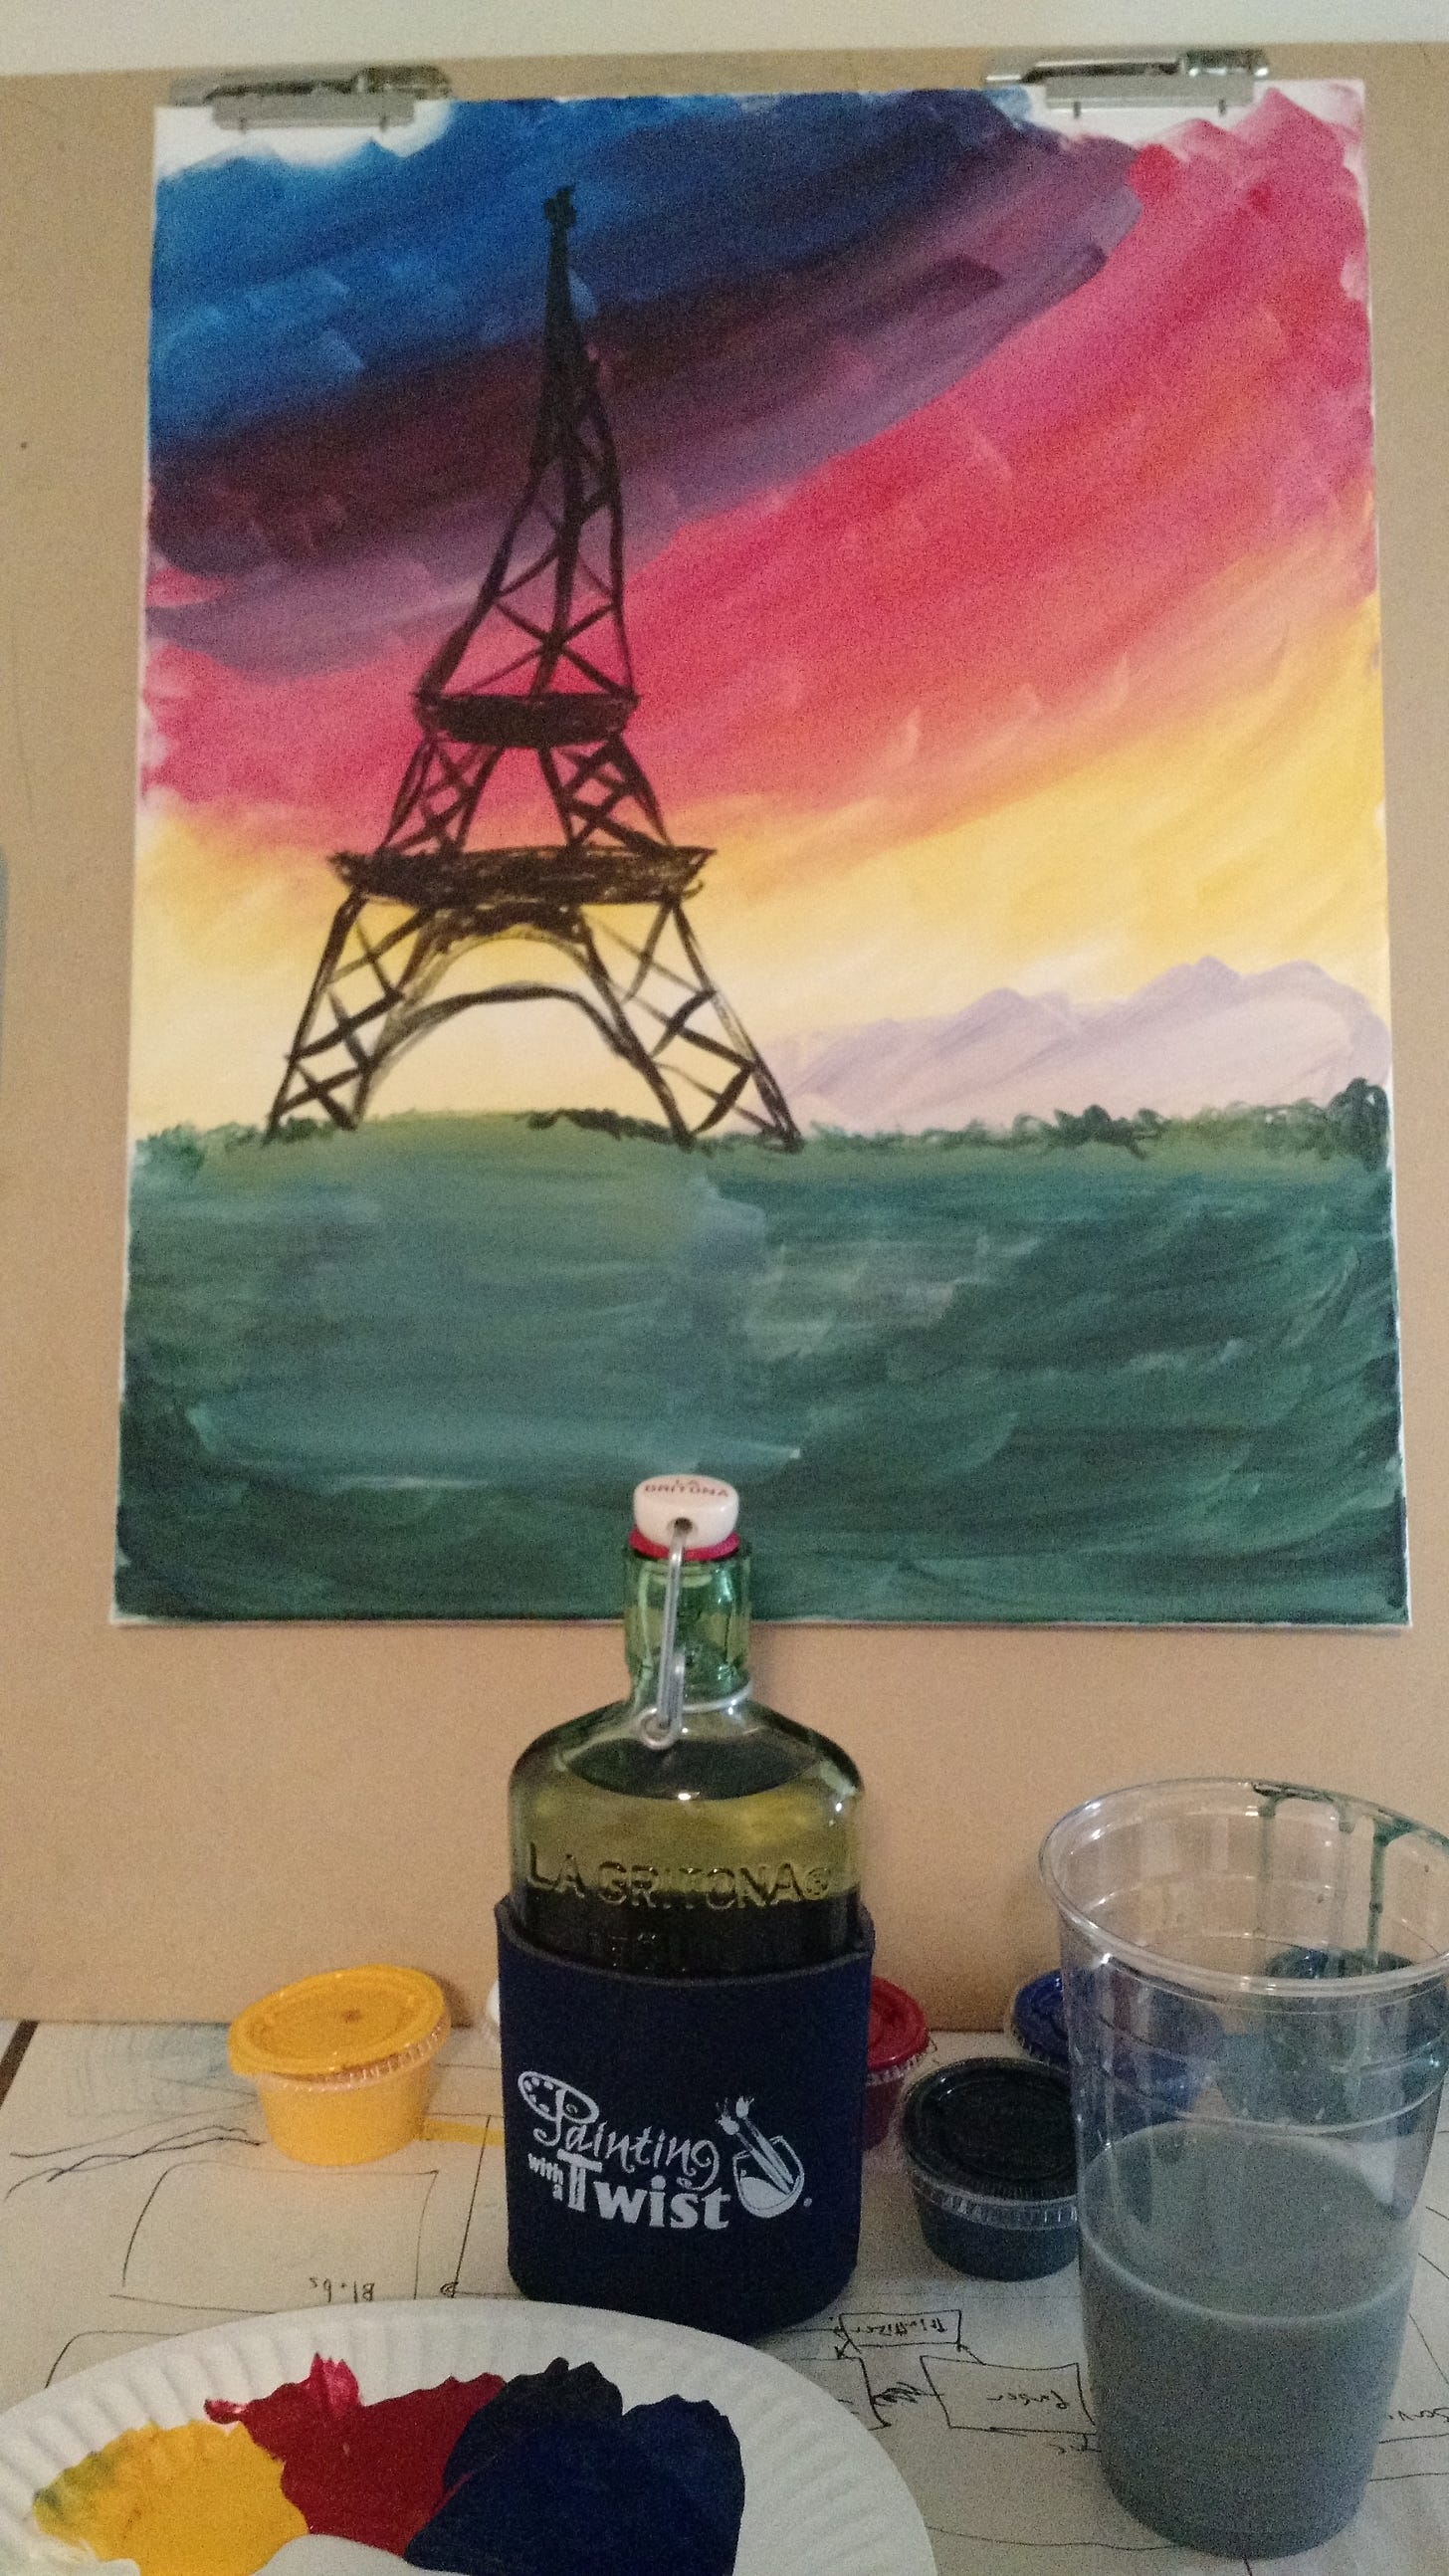 A painting of the eiffel tower, with painting supplies